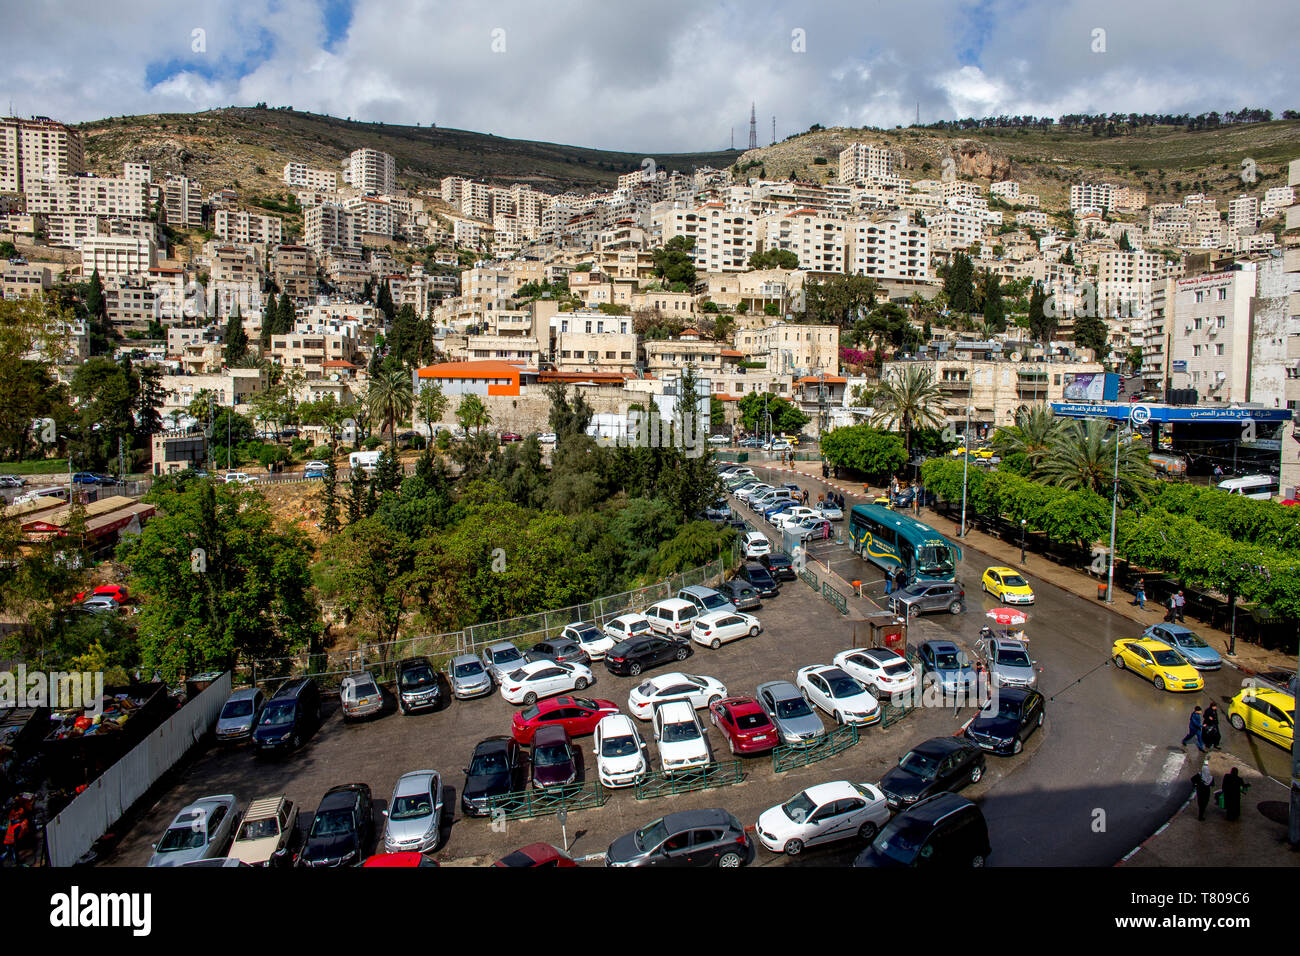 Nablus city centre, West Bank, Palestine, Middle East Stock Photo